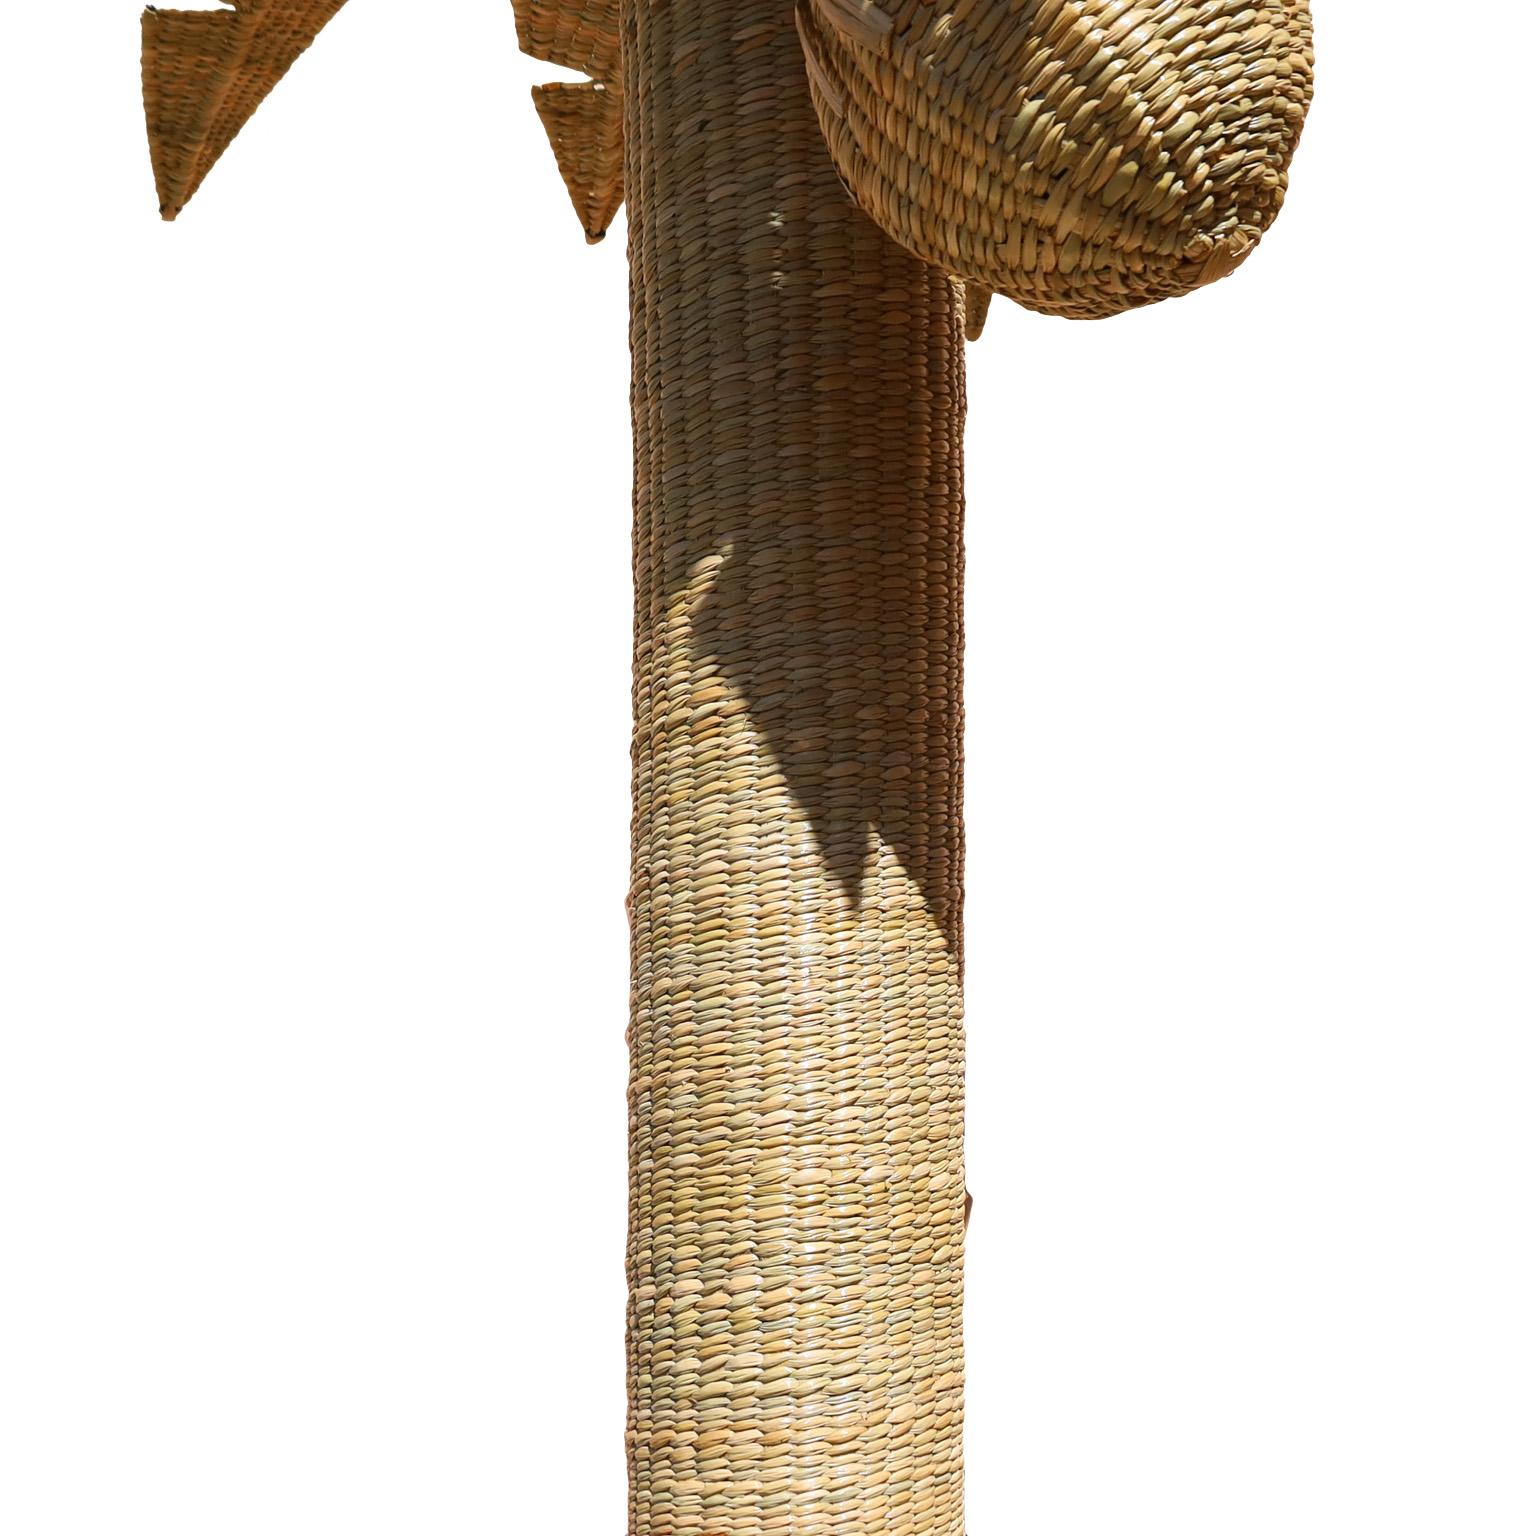 Life Size Wicker Palm Tree Sculpture from the FS Flores Collection In Good Condition For Sale In Palm Beach, FL